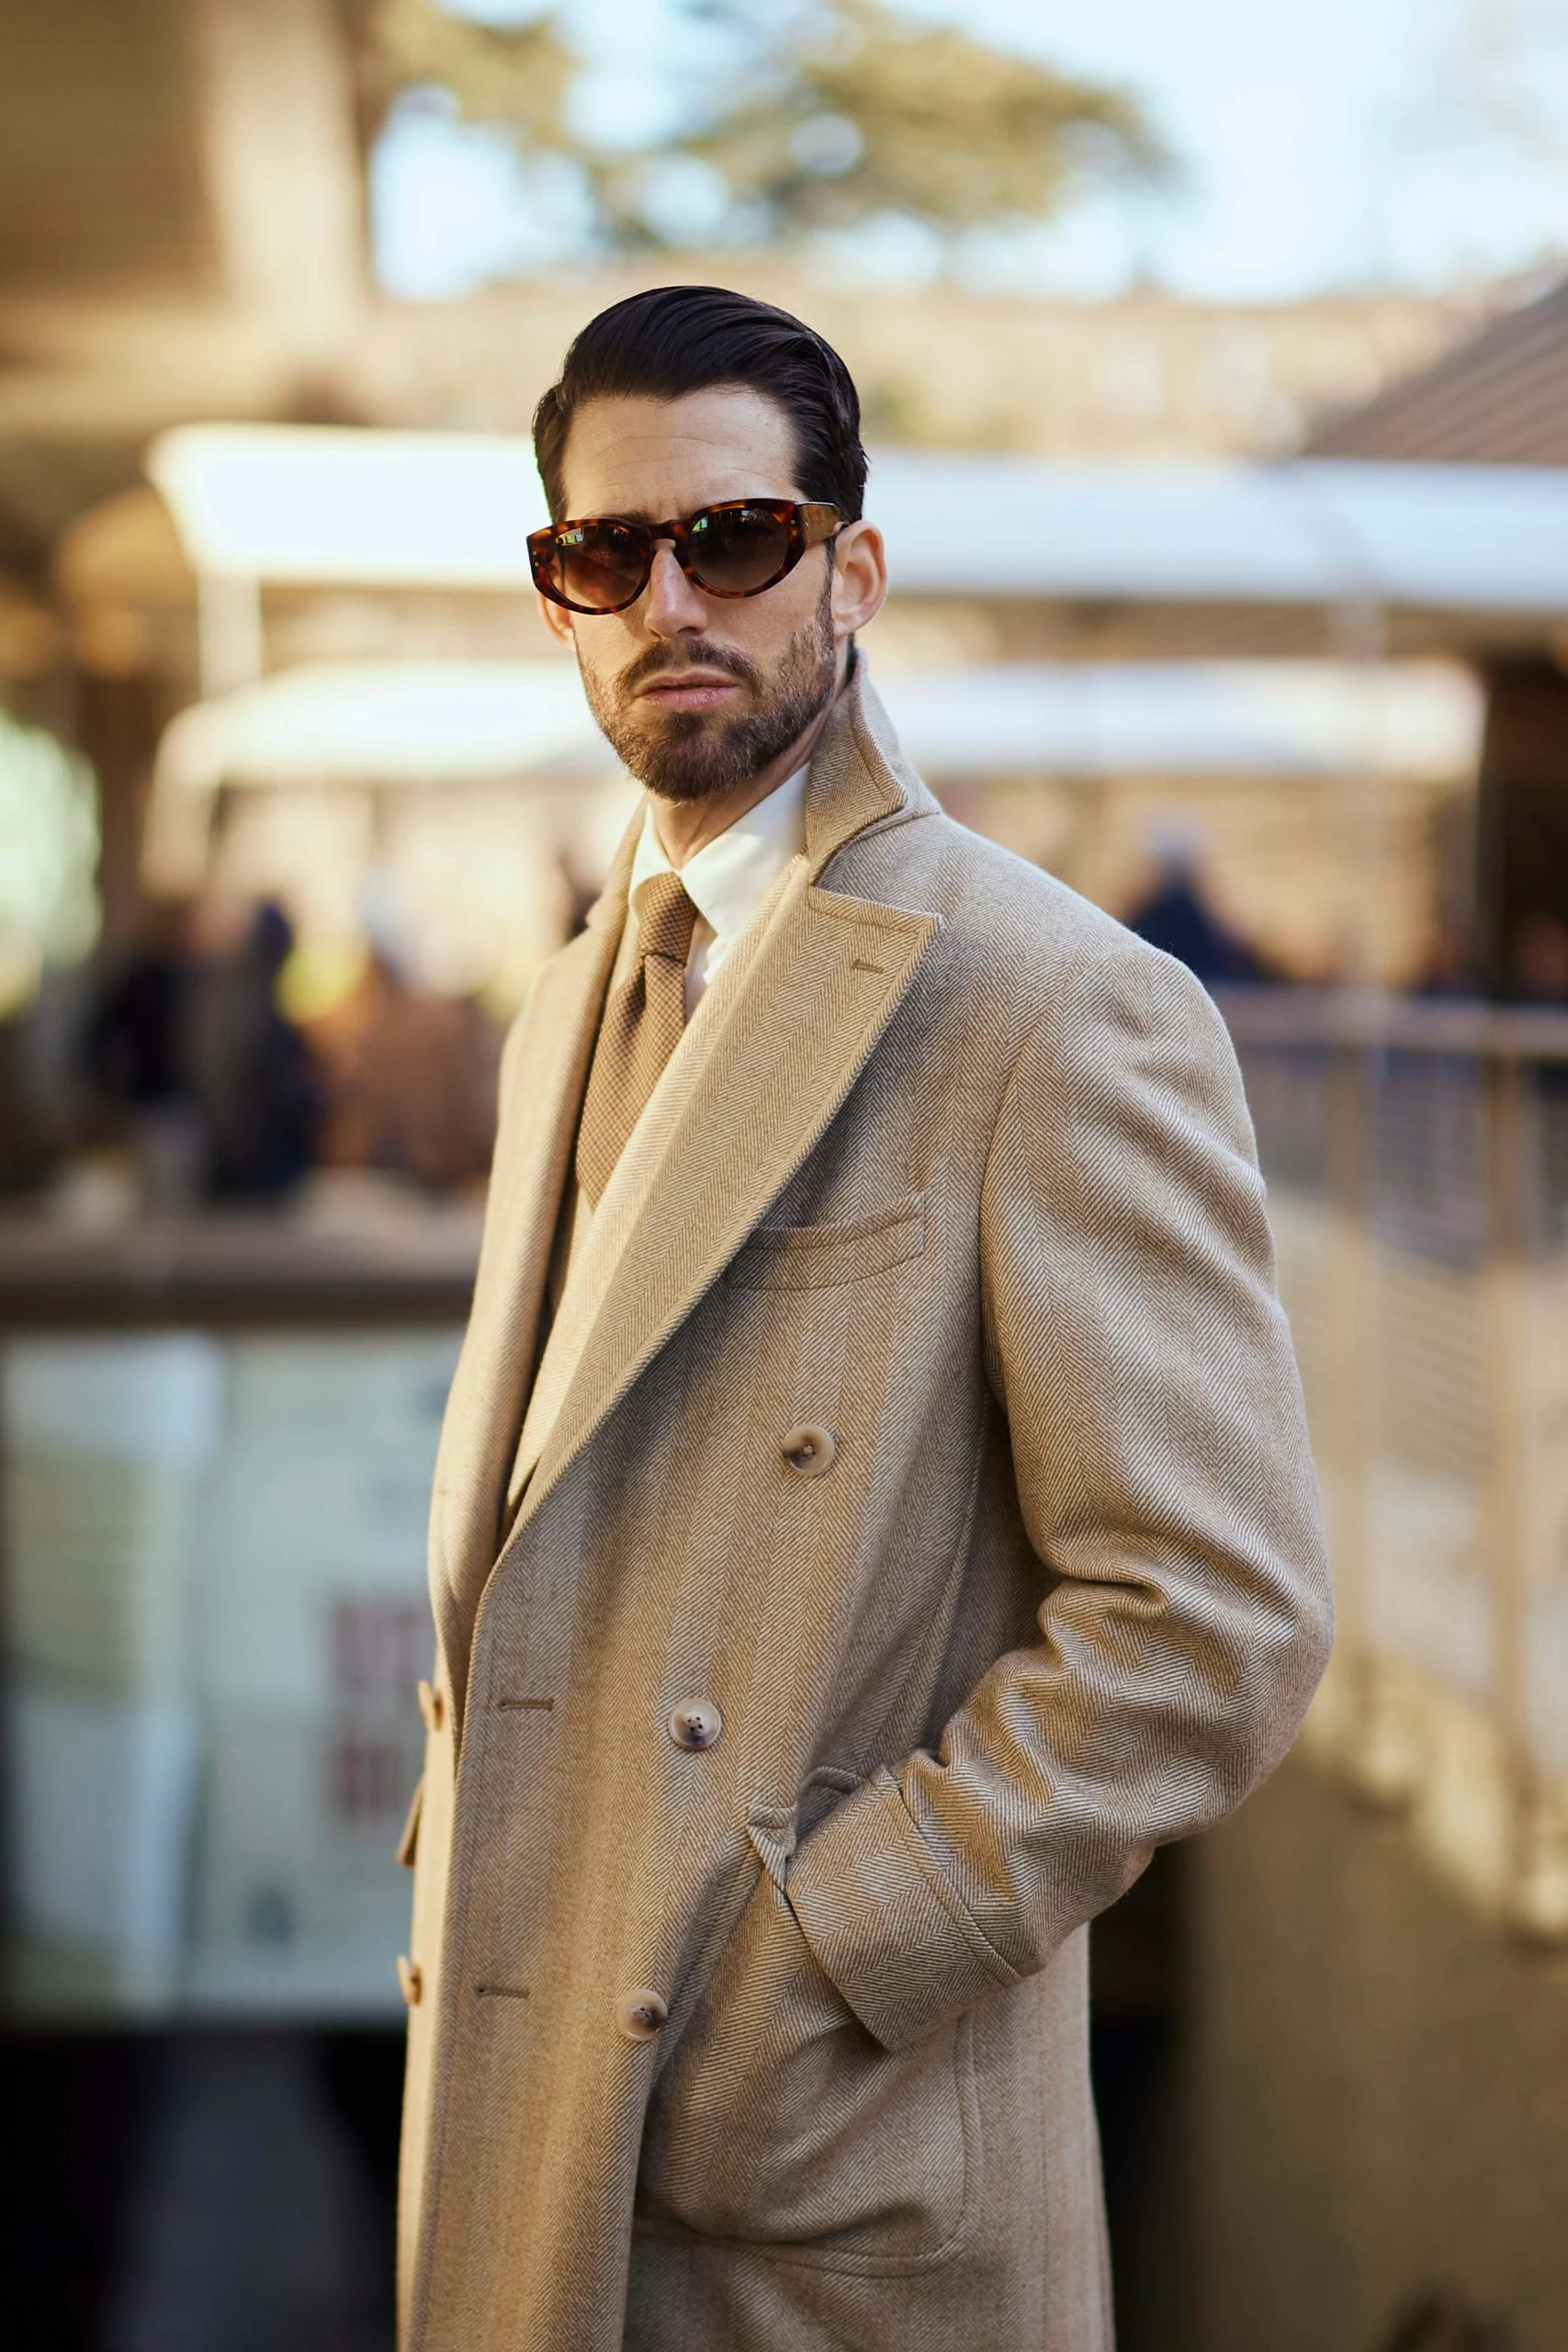 carlos domord at pitti uomo wearing a custom made beige herringbone coat and a matching suit from mond